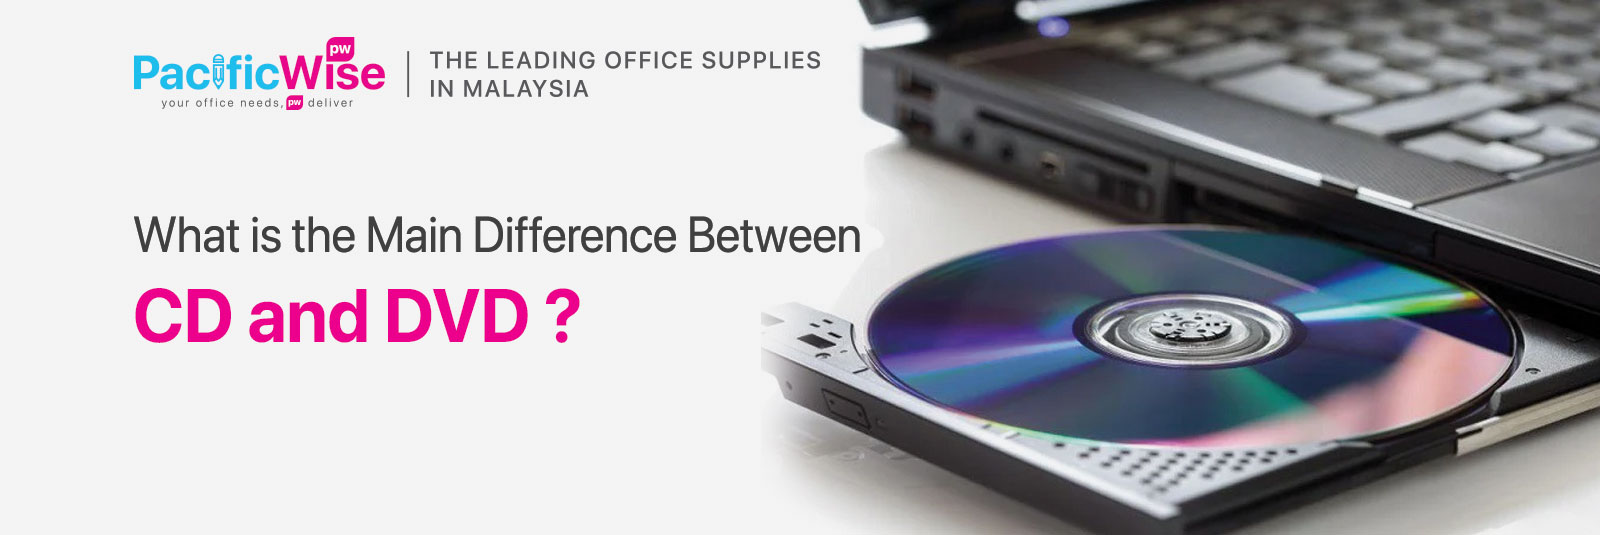 What Is The Main Difference Between CD and DVD?